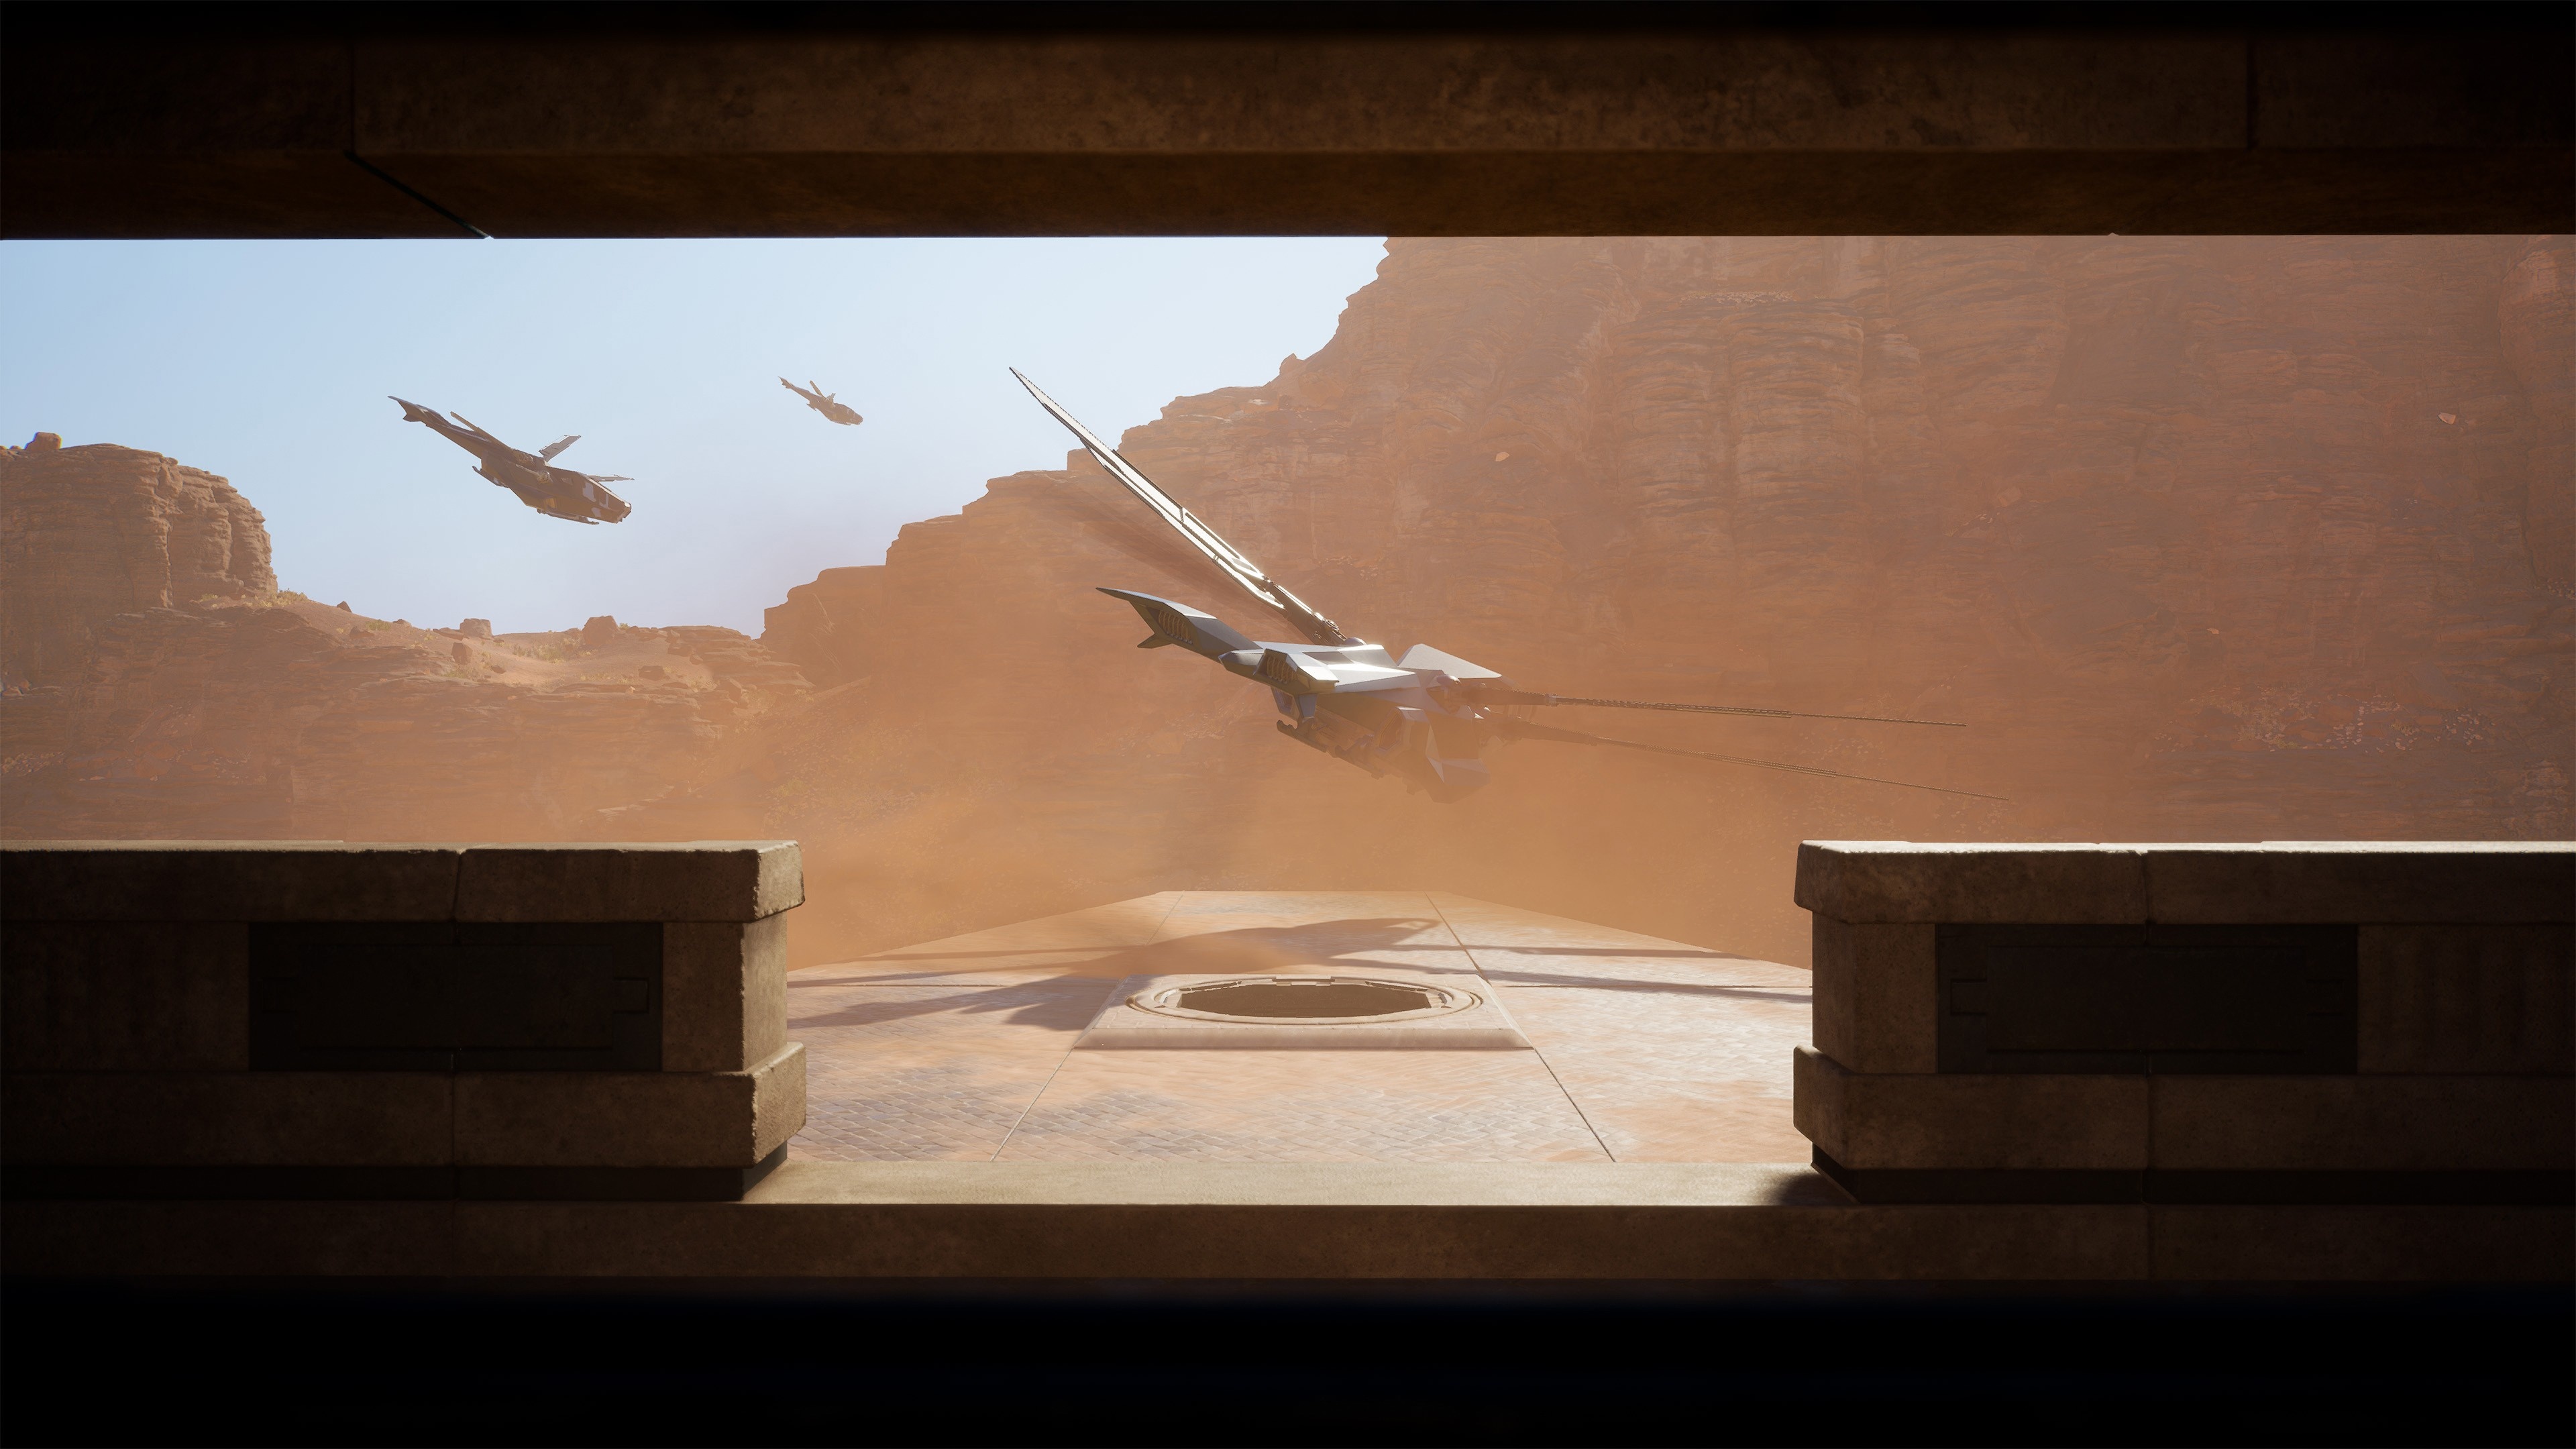 (Flying works, riding doesn''t: The new Dune game doesn''t have all features at release.)